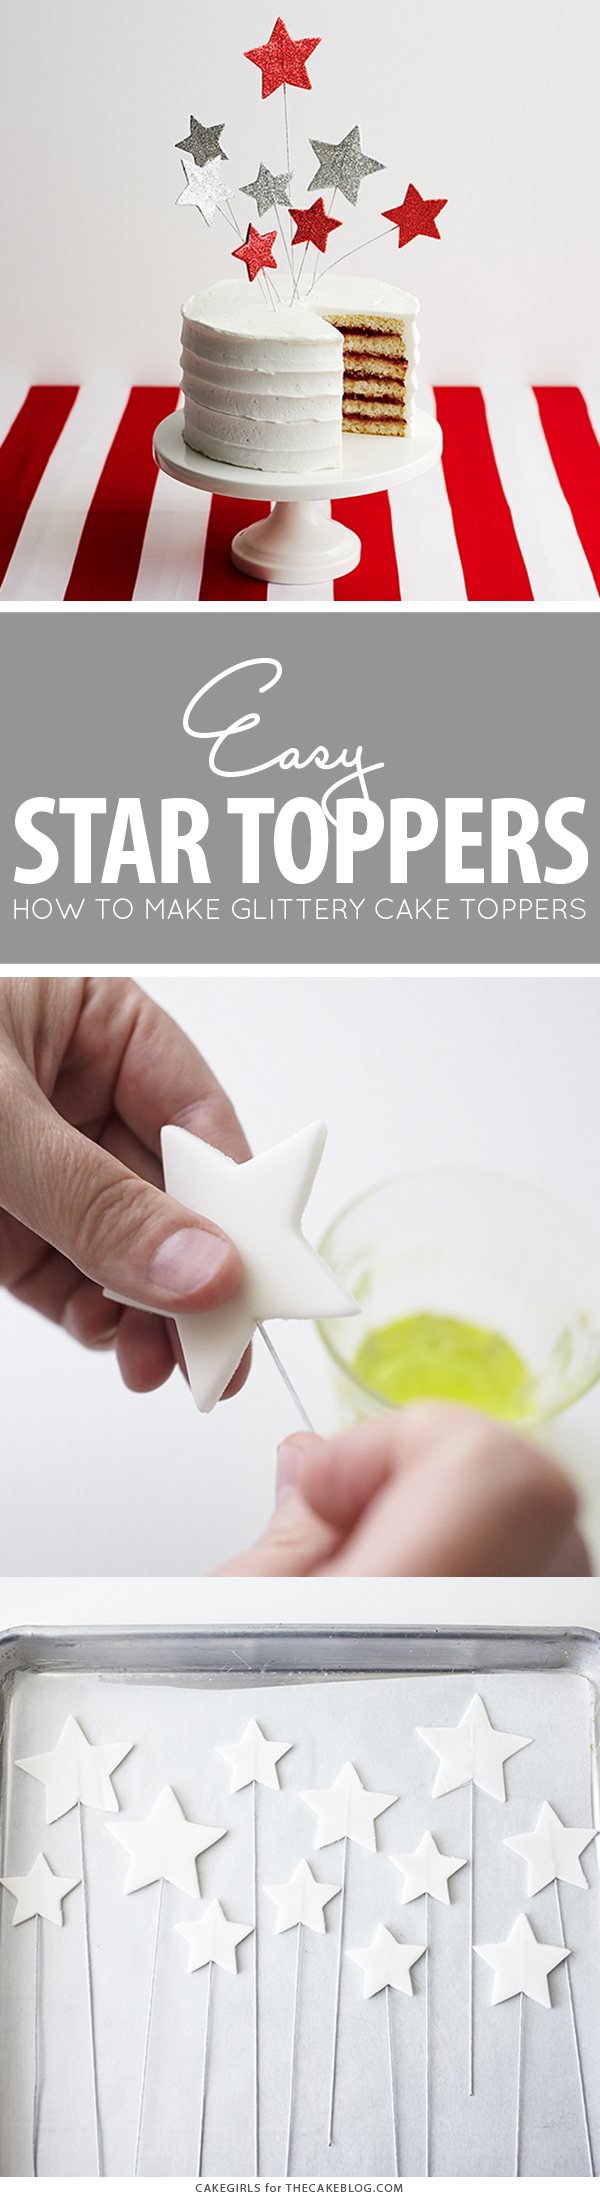 How to make glittery, star shaped cake toppers on wire. An easy cake decoration that can be made in advance!